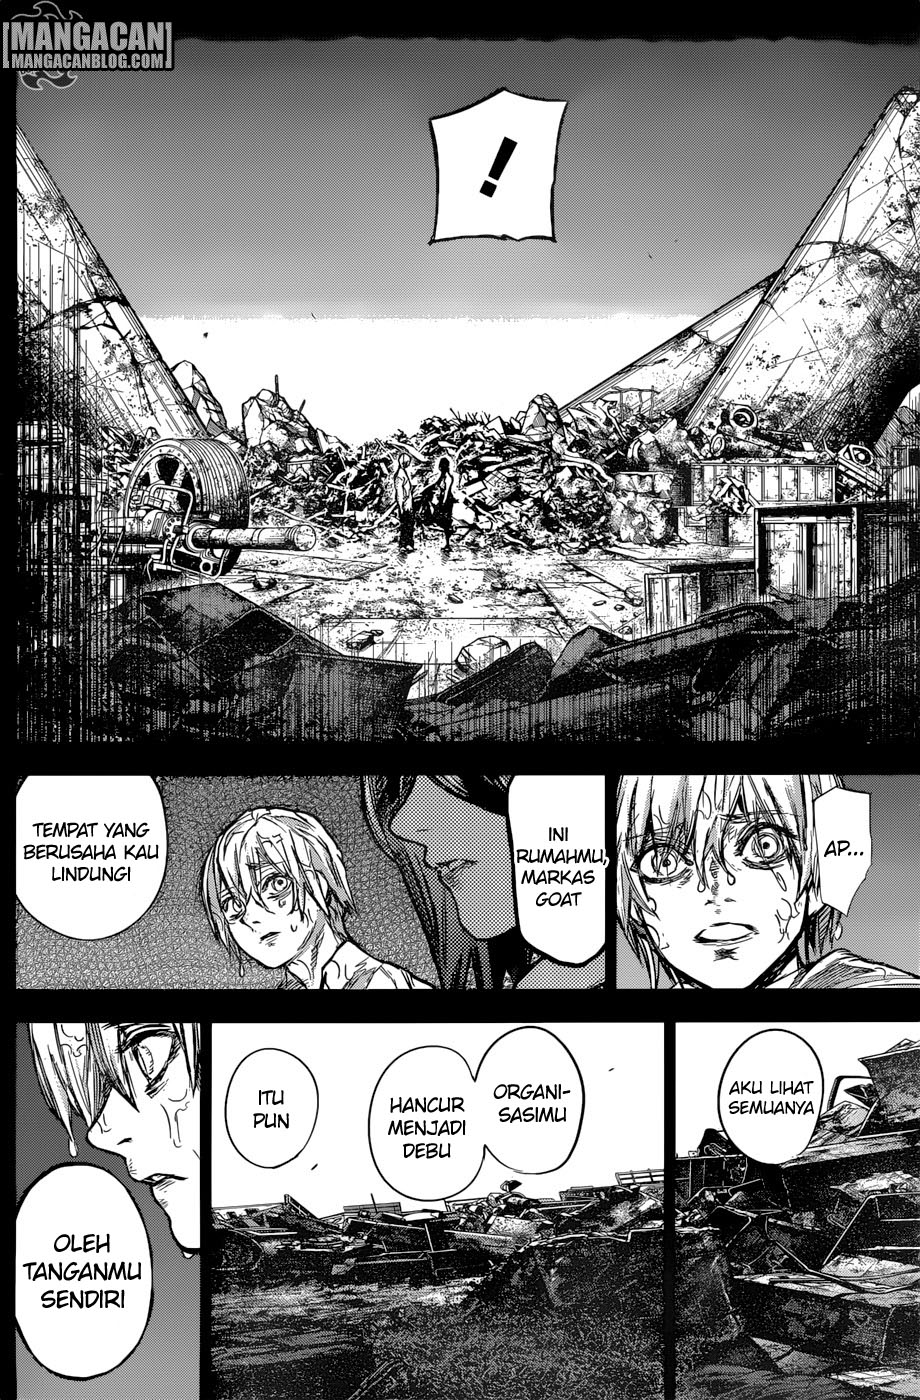 Tokyo Ghoul:re Chapter 158